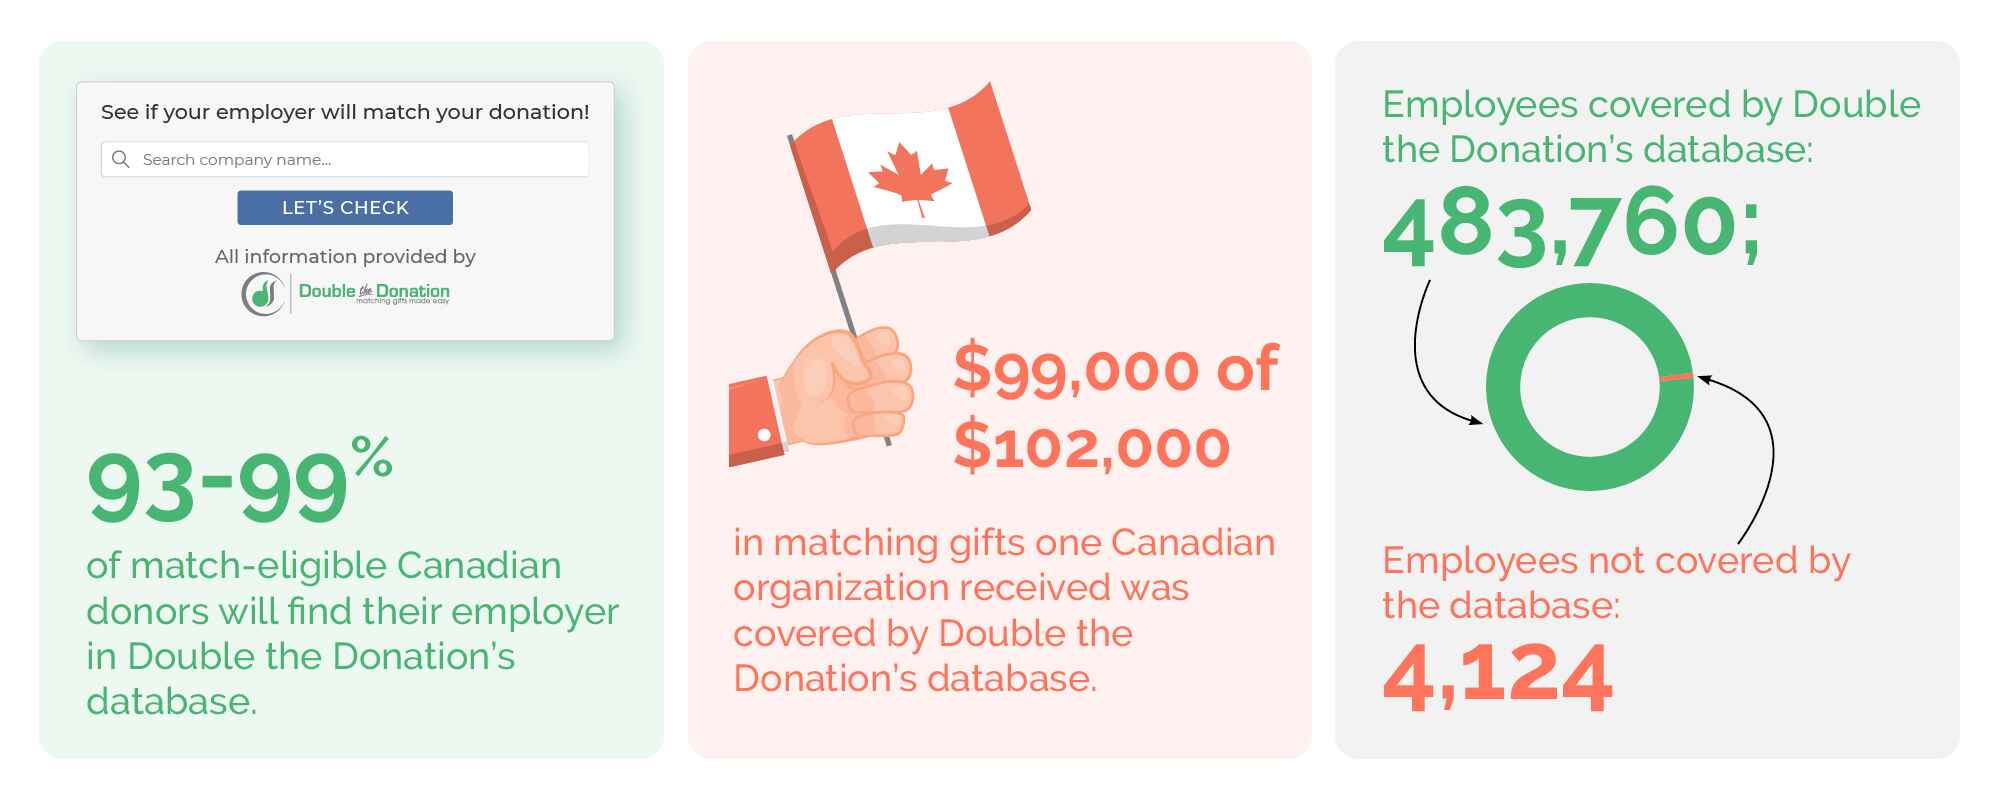 Double the Donation's coverage of Canadian Companies That Match Gifts